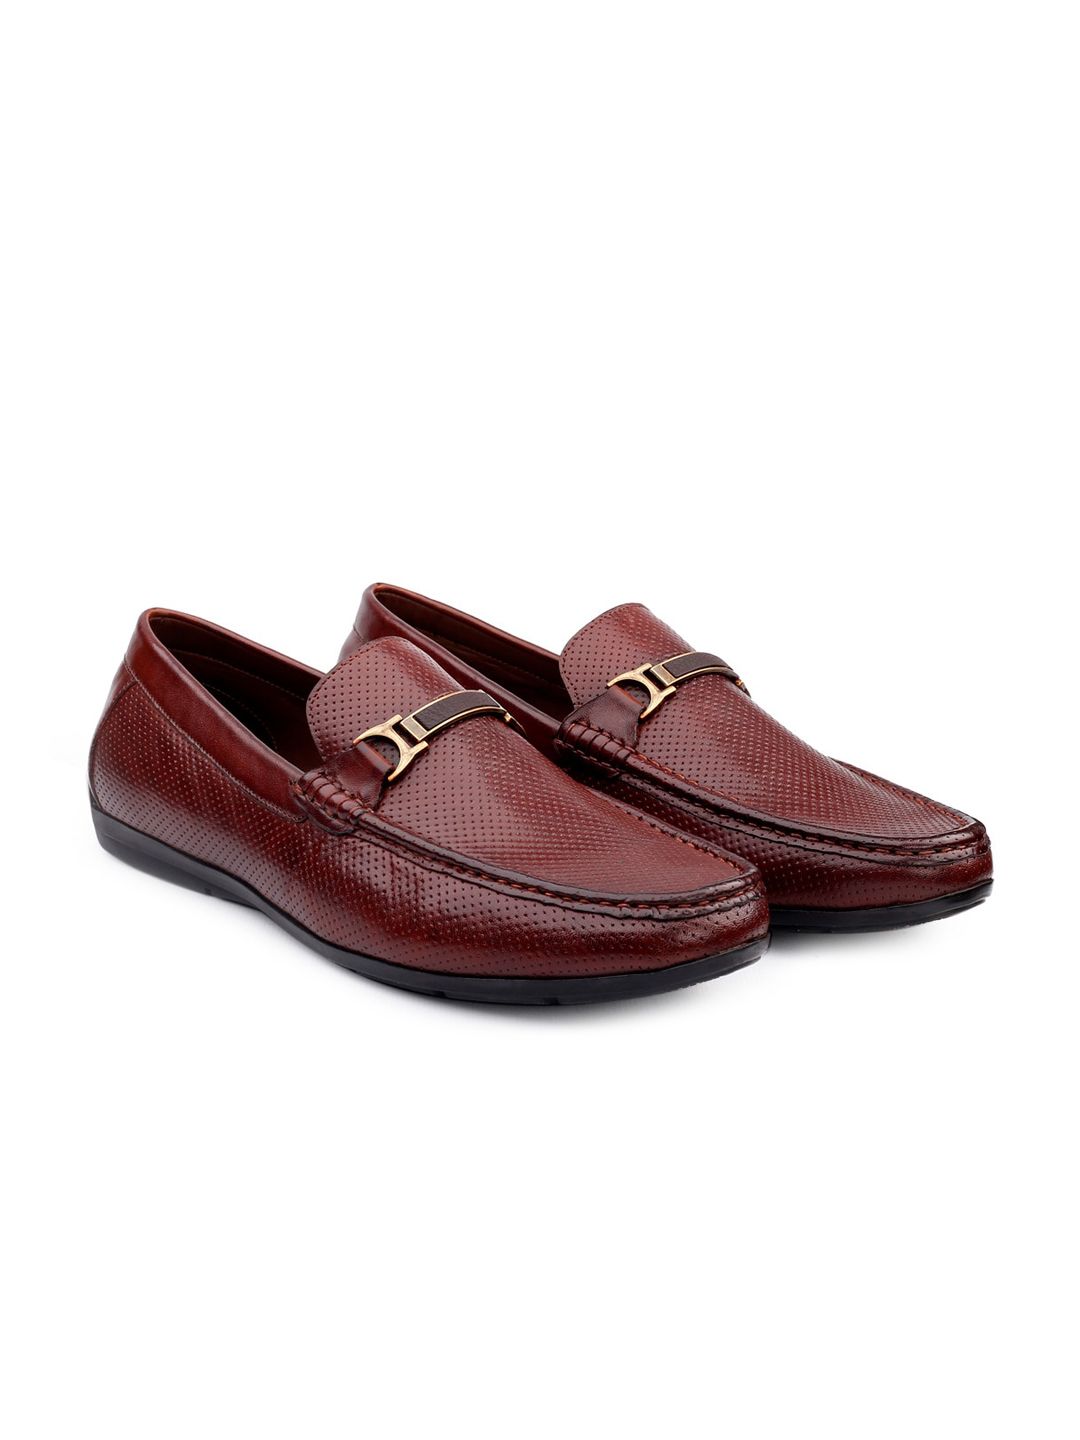 One8 Men Brown Solid Genuine Leather Formal Loafers